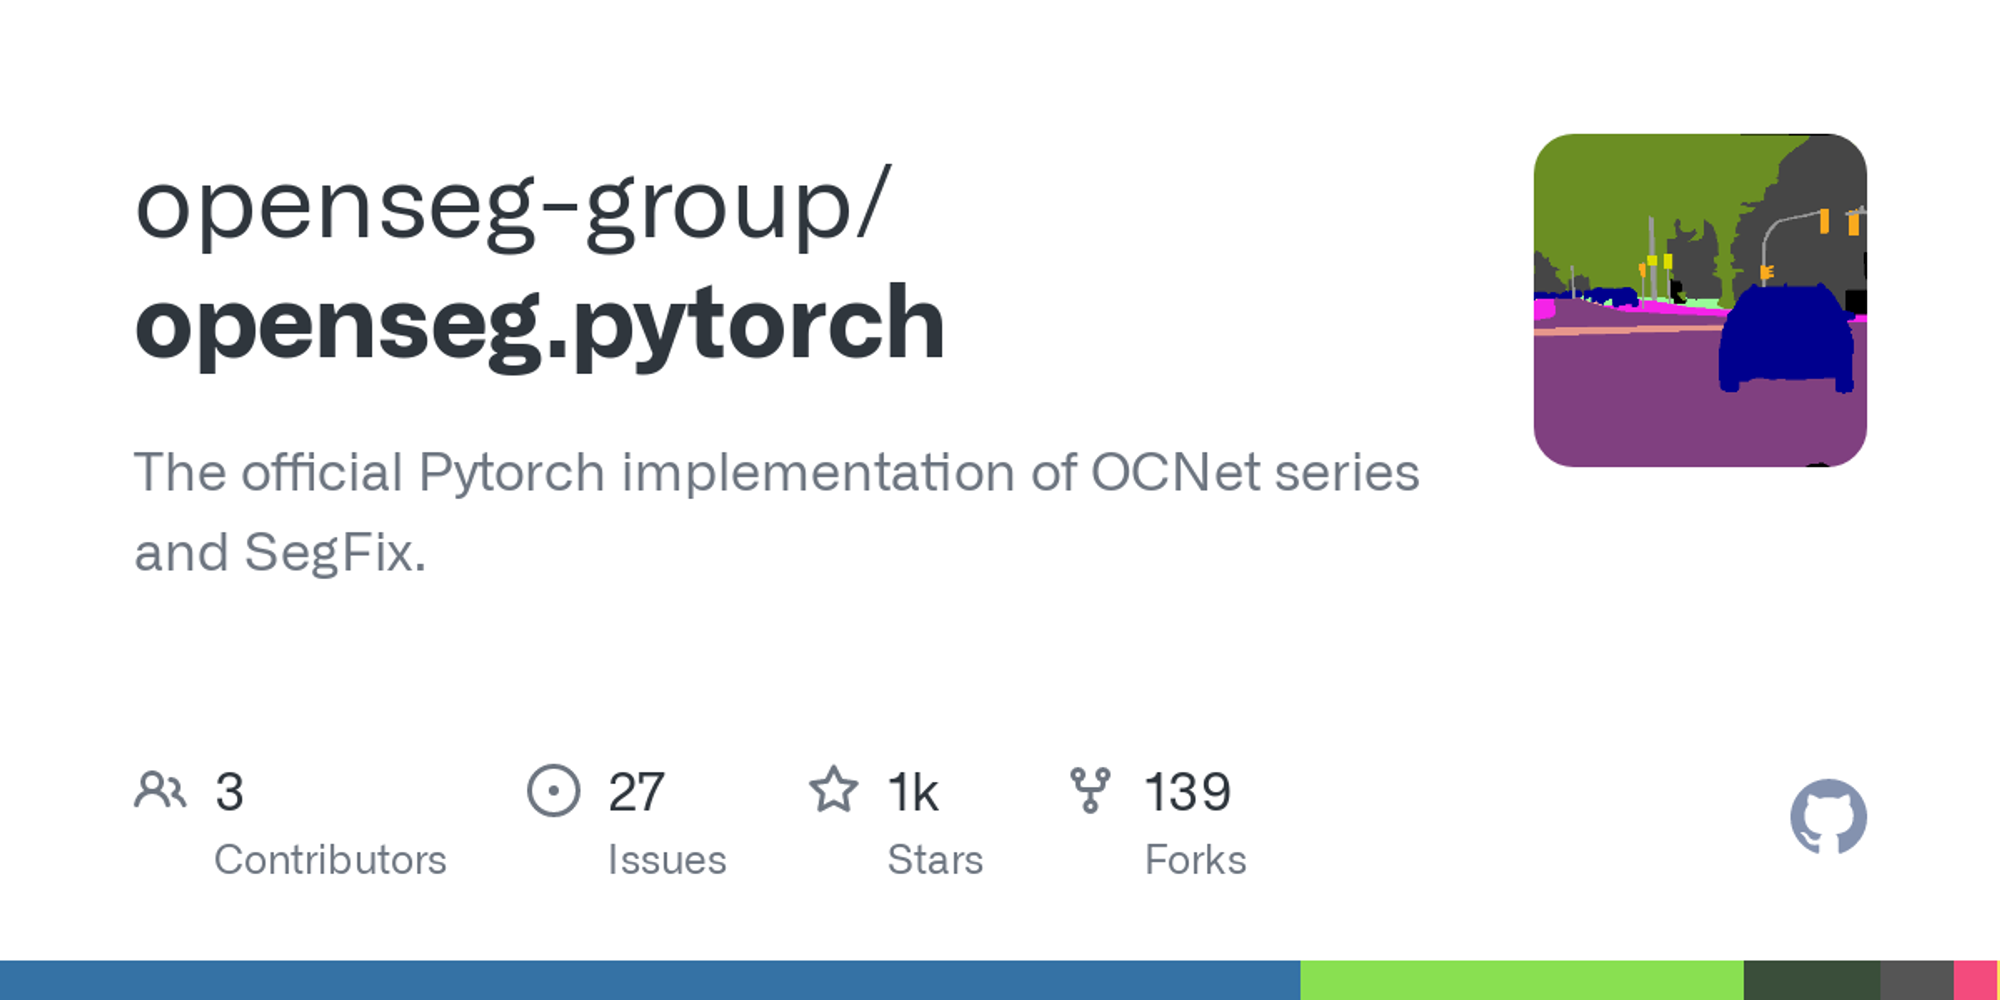 GitHub - openseg-group/openseg.pytorch: The official Pytorch implementation of OCNet series and SegFix.